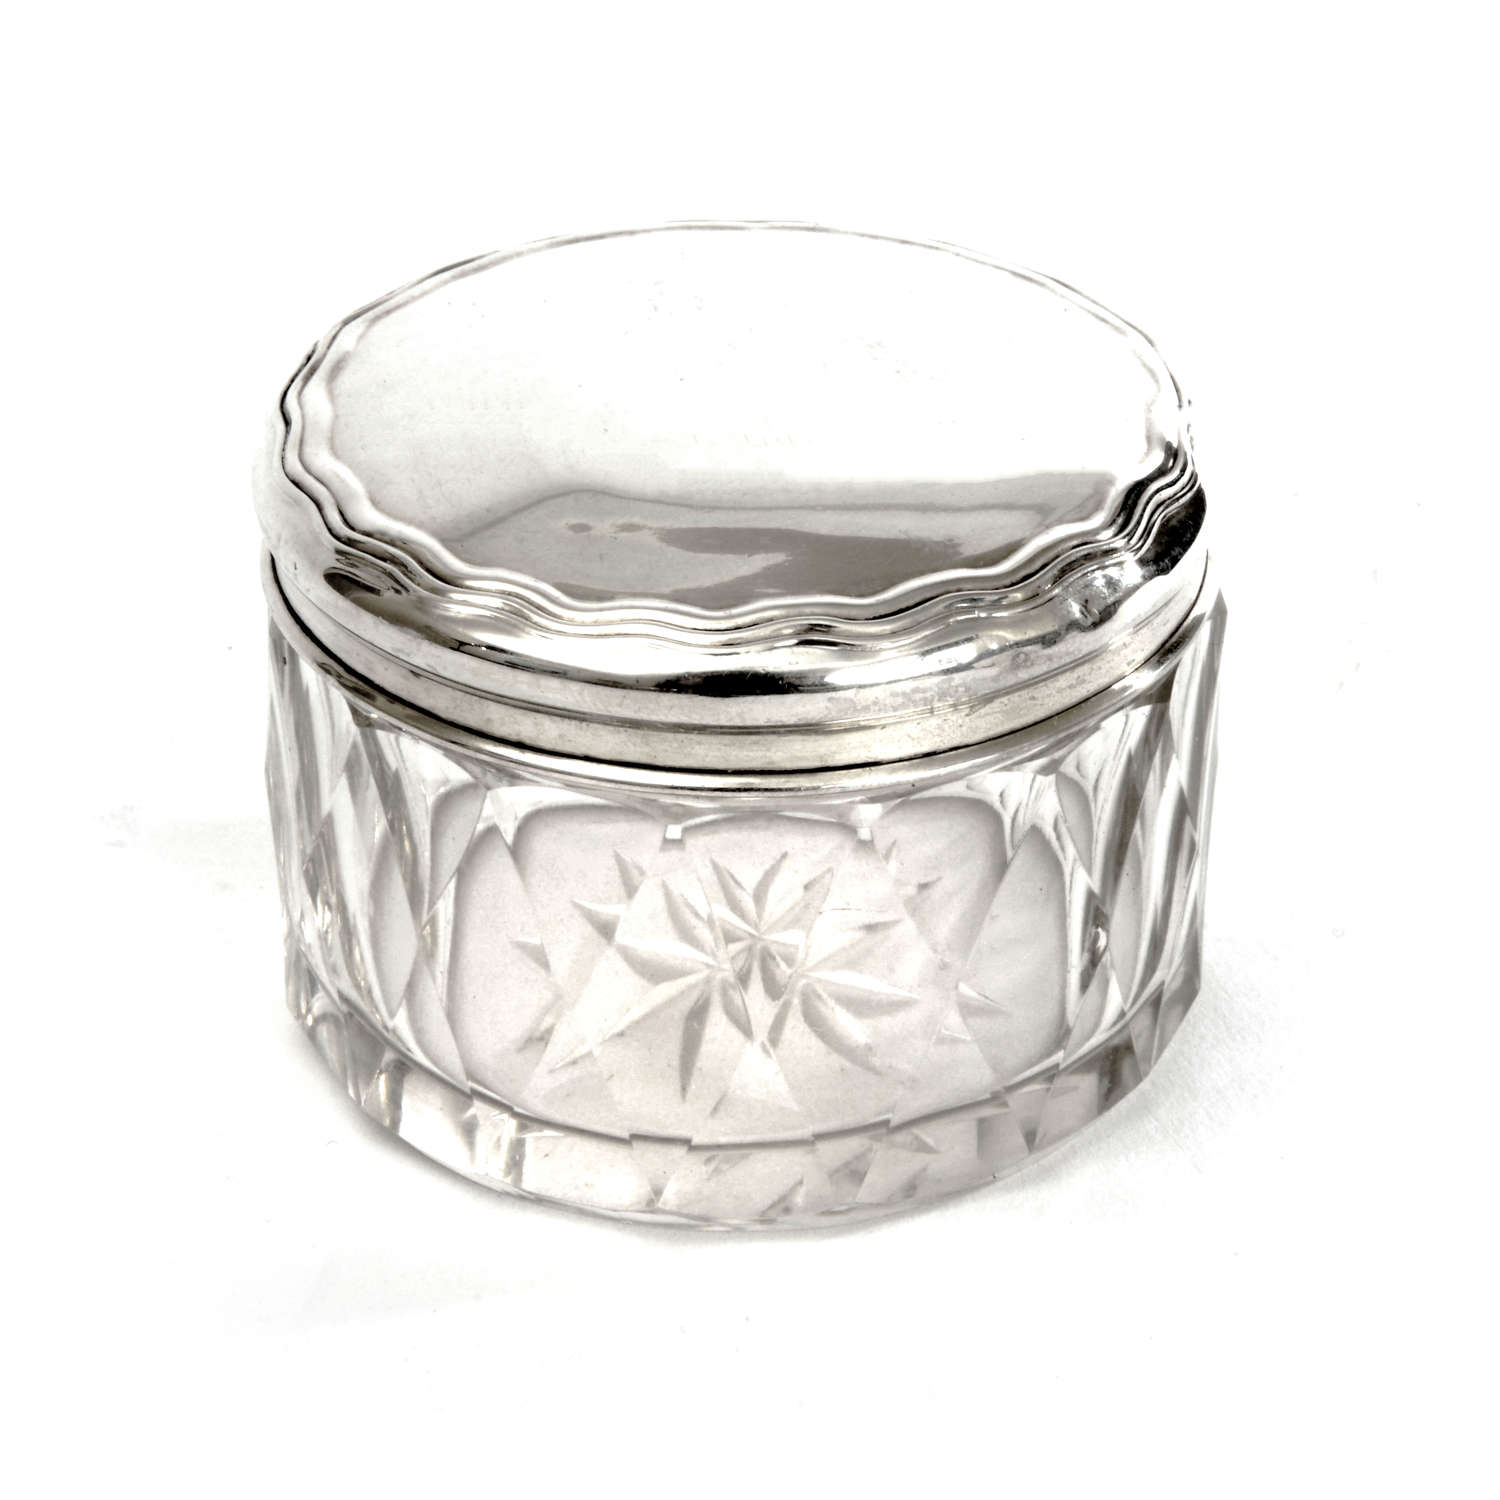 A Circular Silver and Glass Trinket/Dressing Table Box